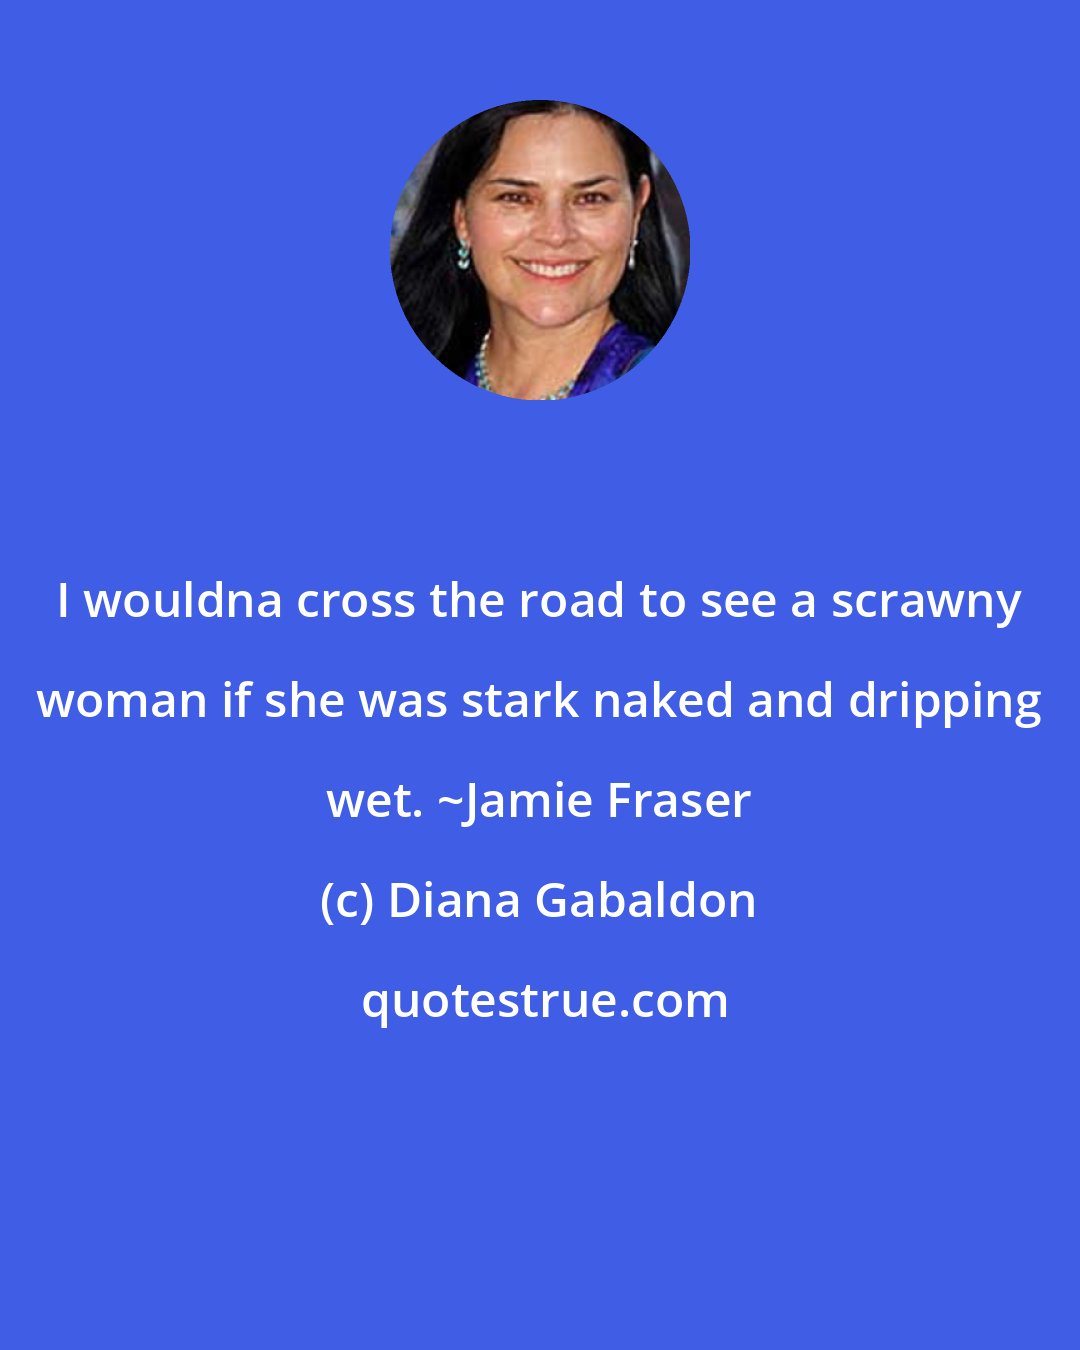 Diana Gabaldon: I wouldna cross the road to see a scrawny woman if she was stark naked and dripping wet. ~Jamie Fraser